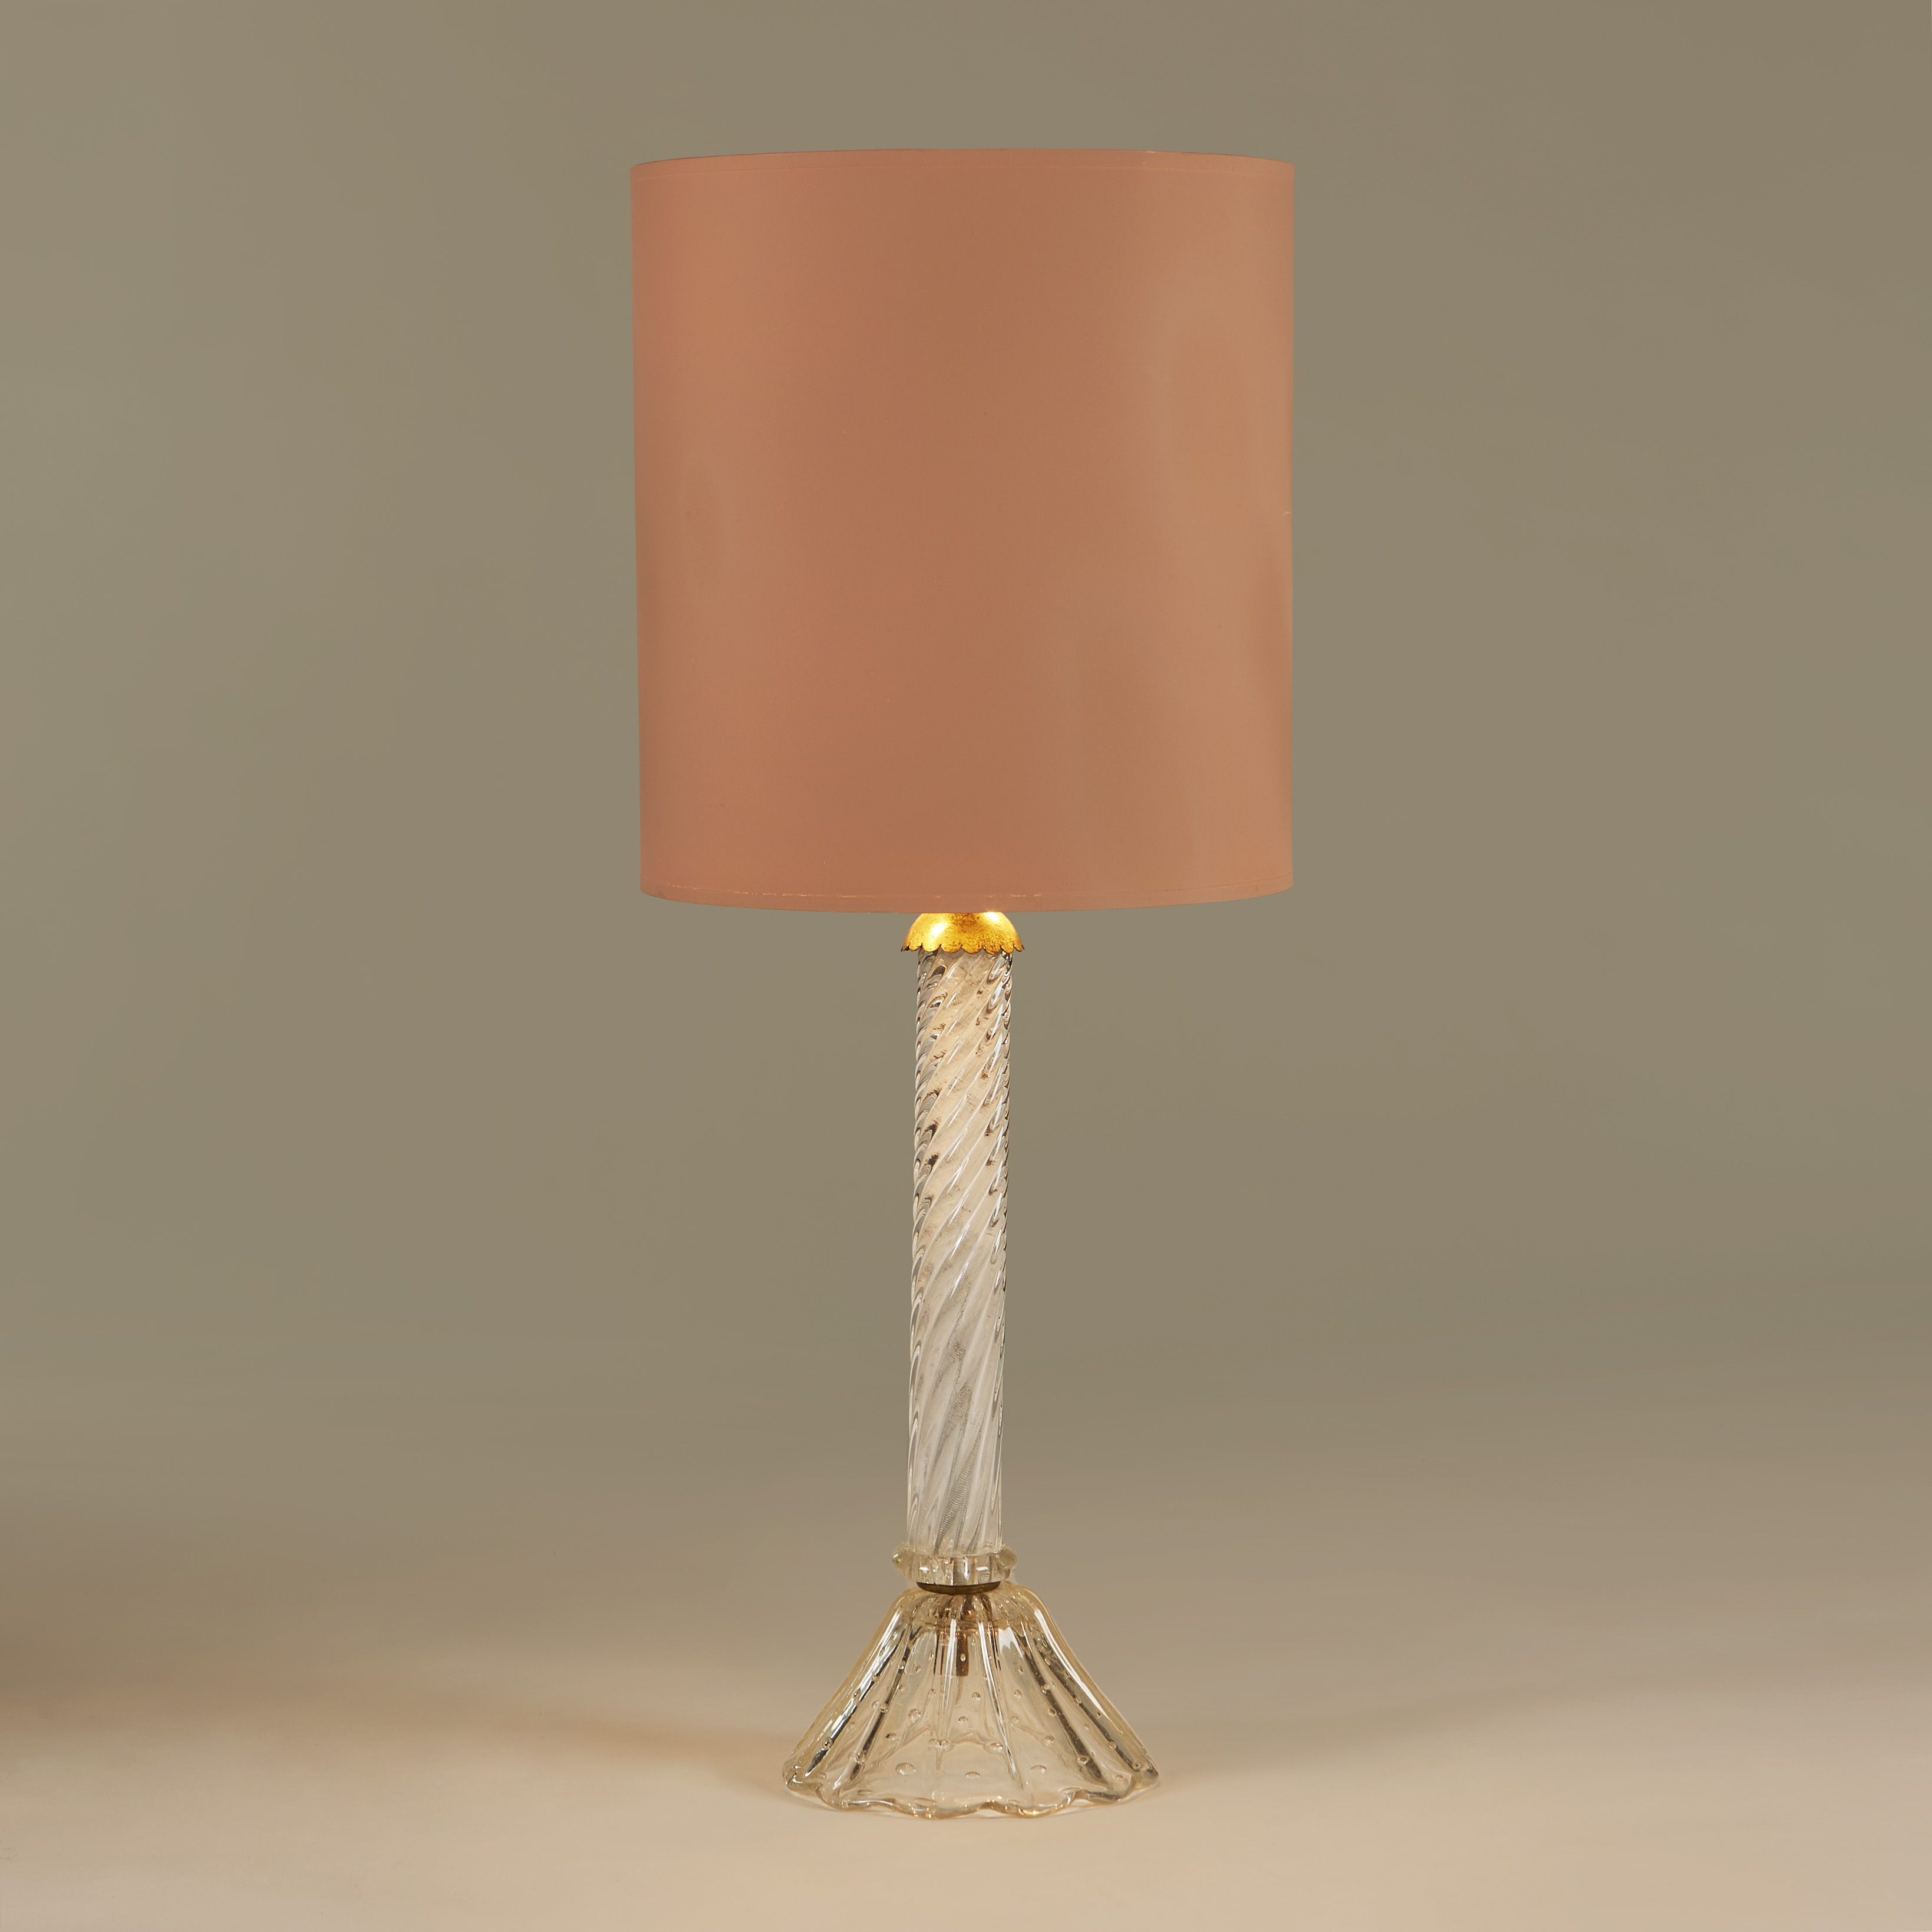 The image for Ornate Table Lamp With Pink Shade 093 V1